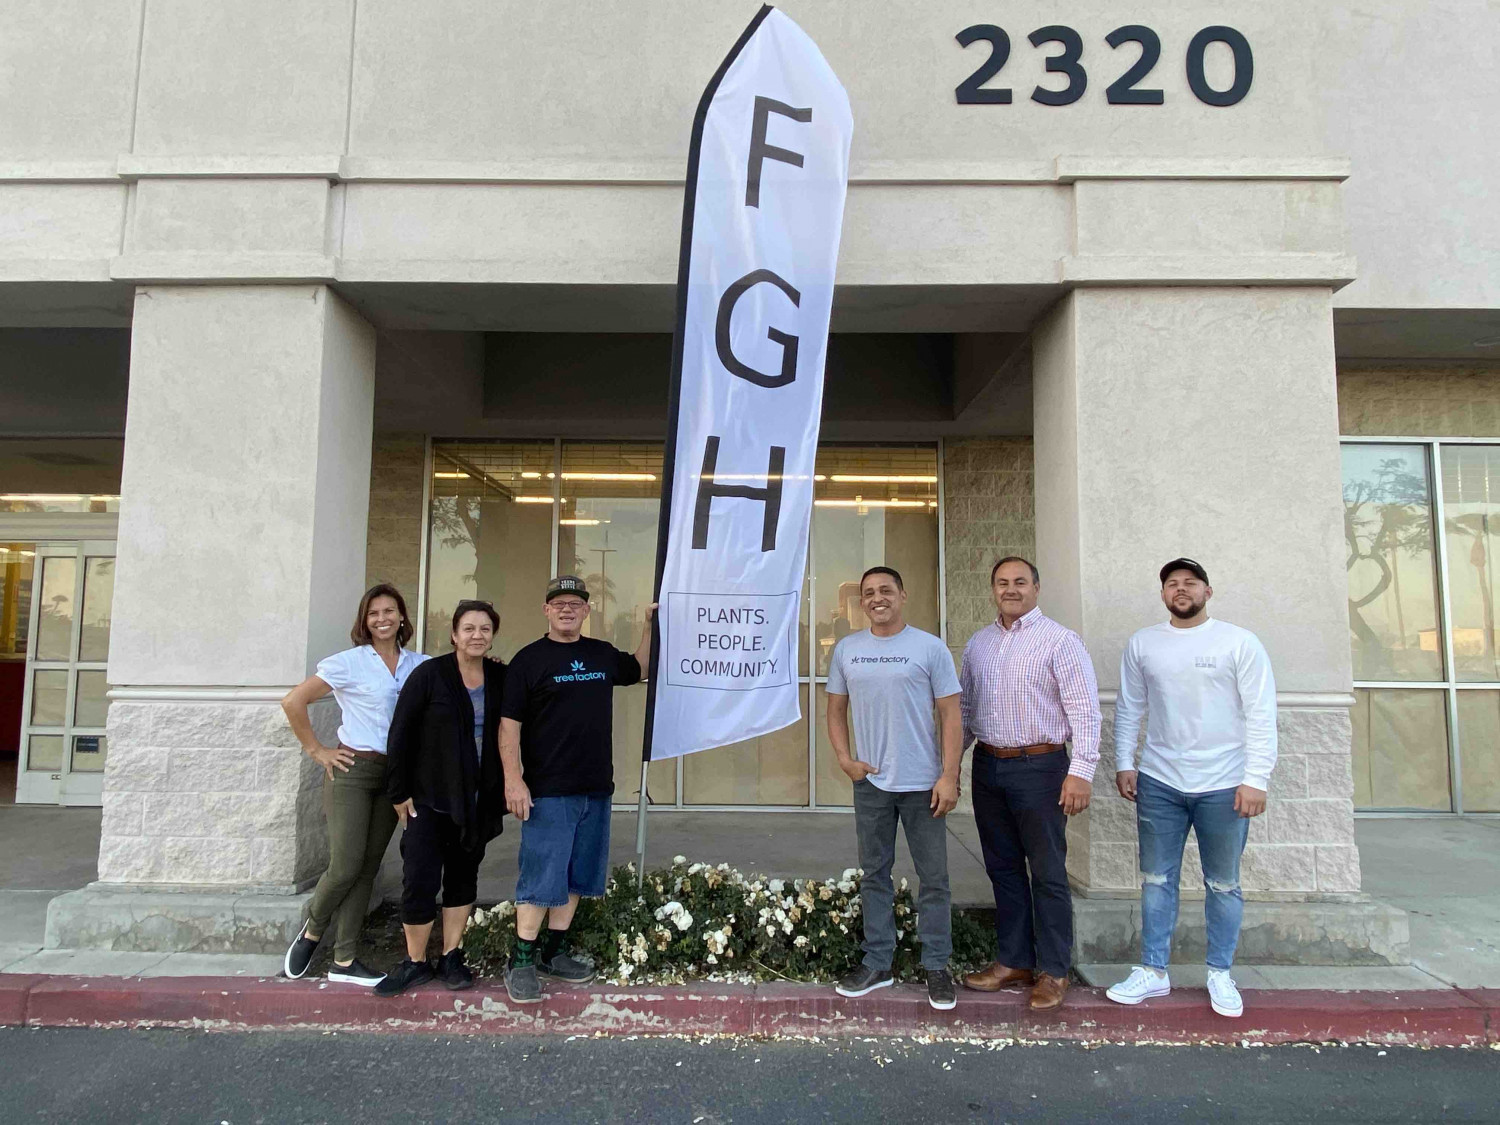 Tree Factory and FGH Retail Invite Guests To Tour Future 23,000 Sq Ft Cannabis Superstore In Oxnard, California